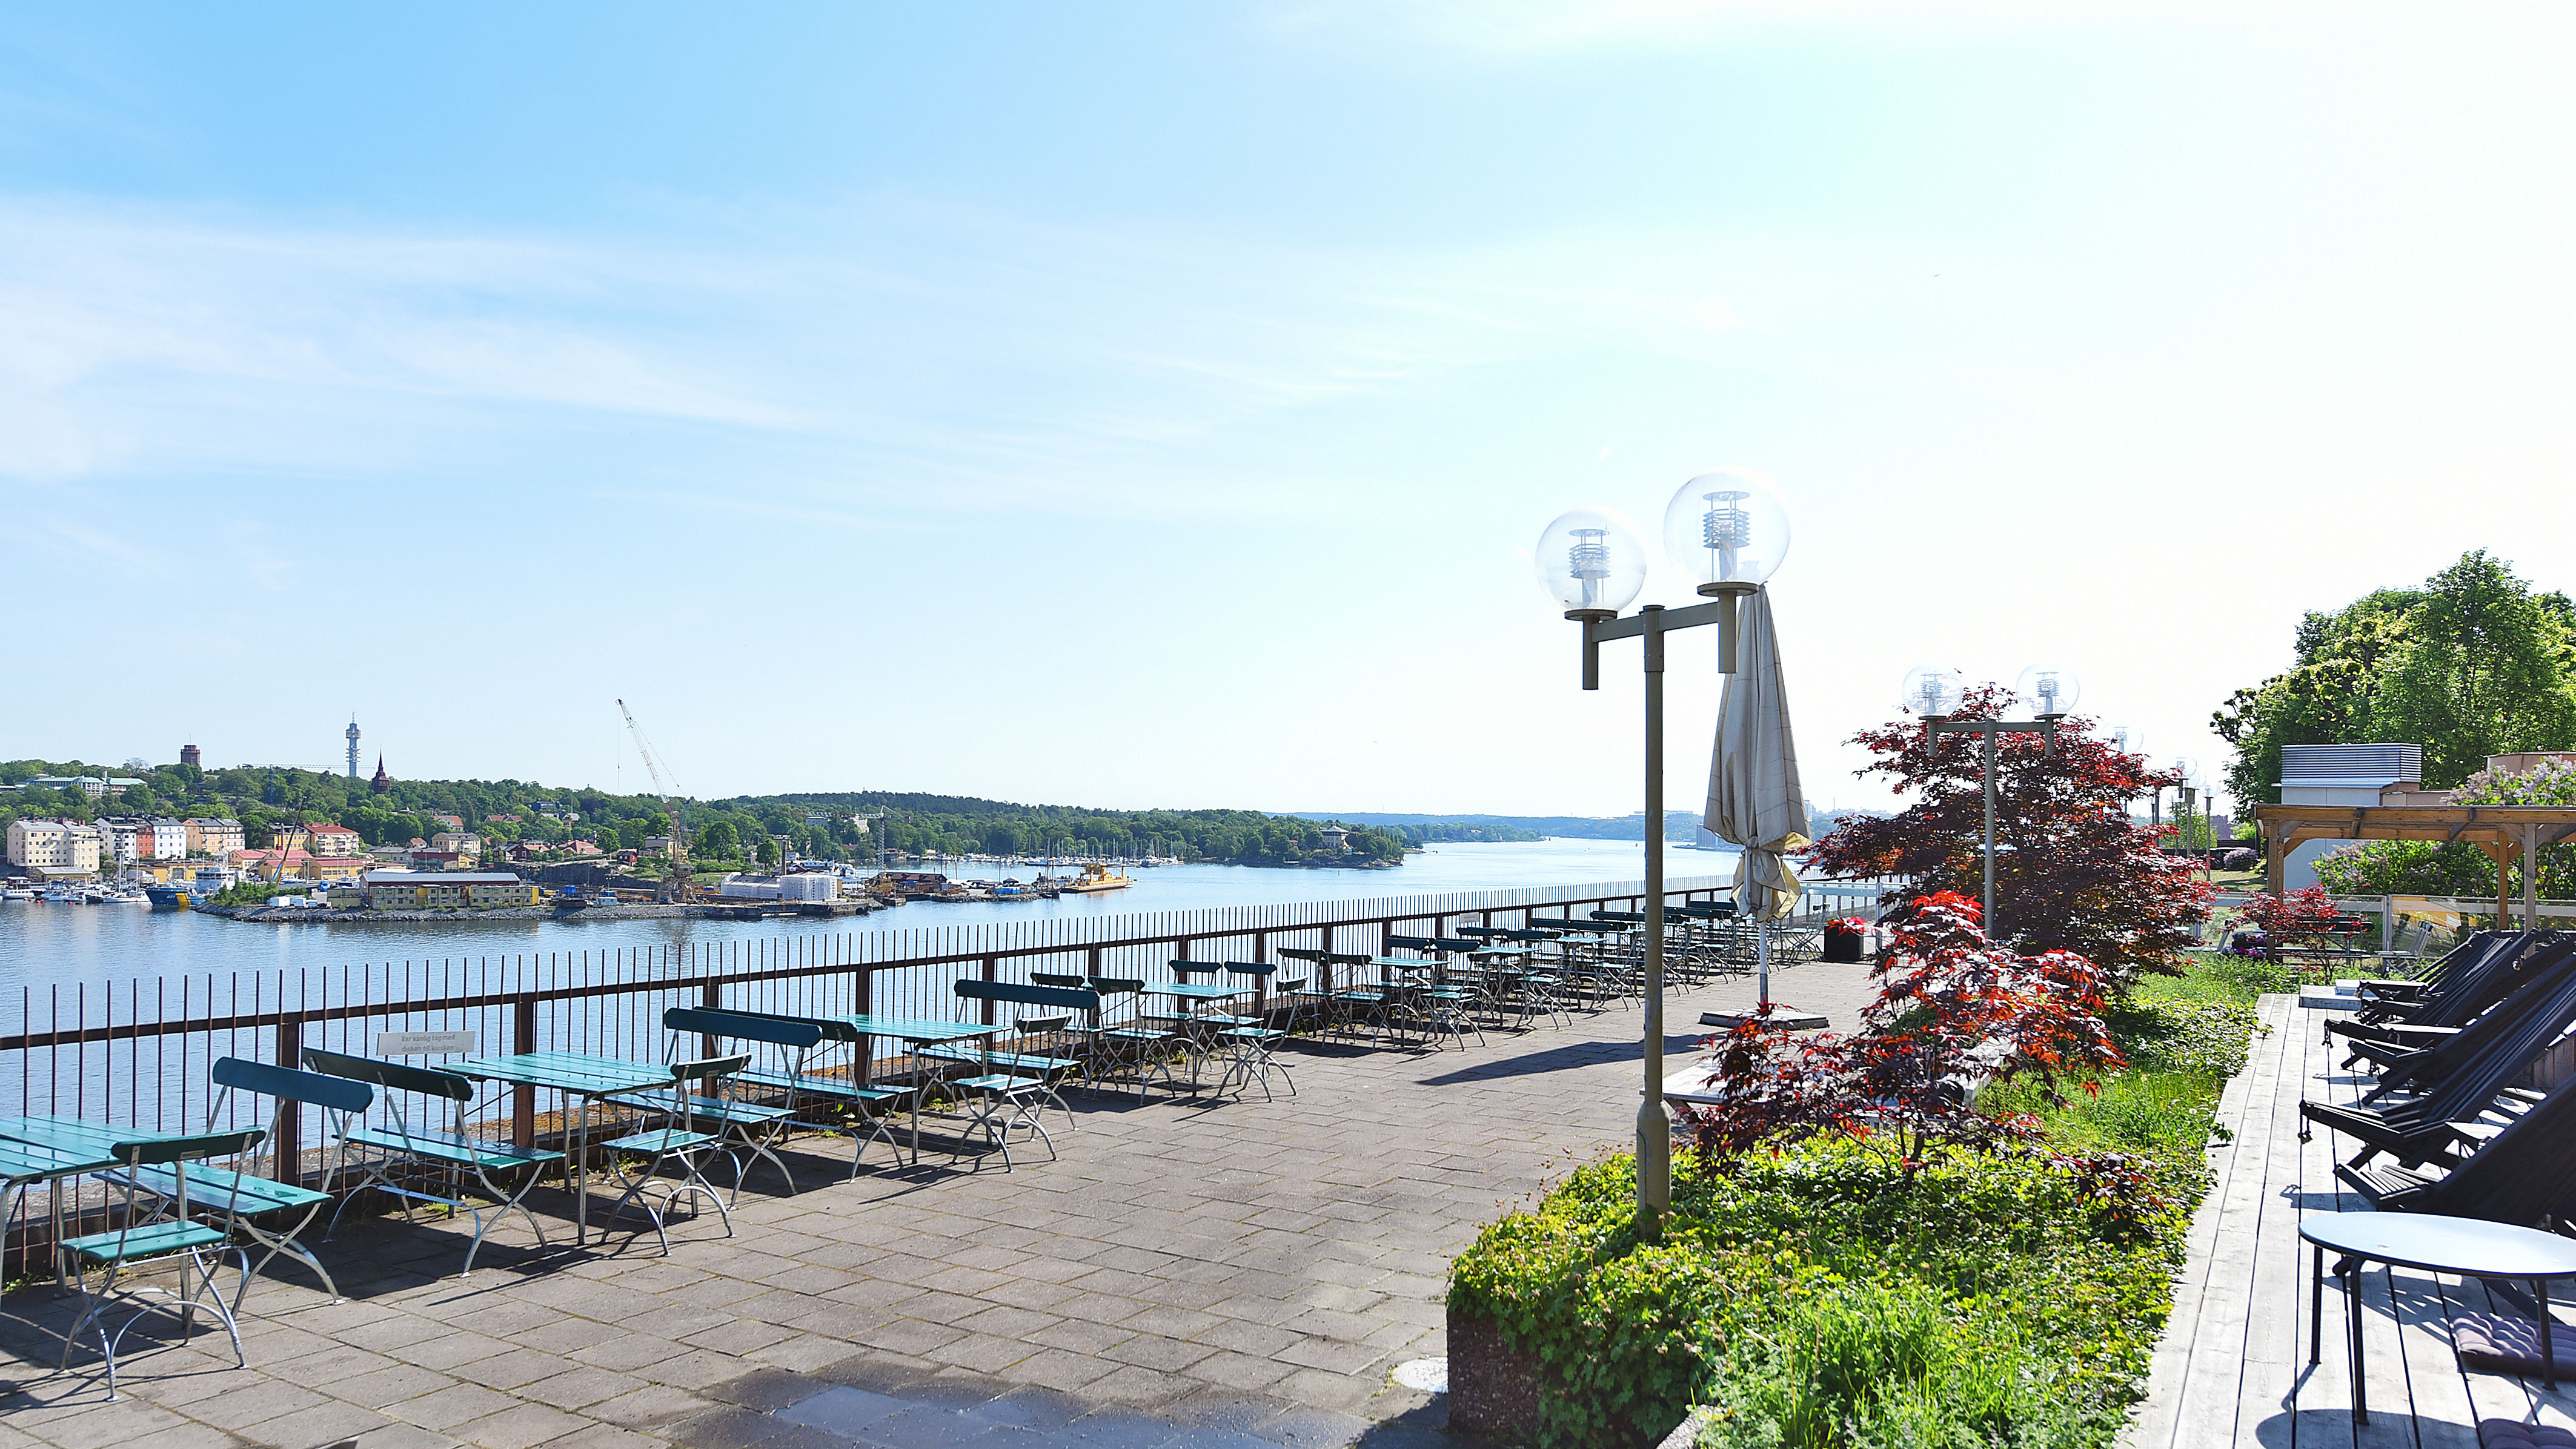 The terraace has a view over Stockholm and its inlet